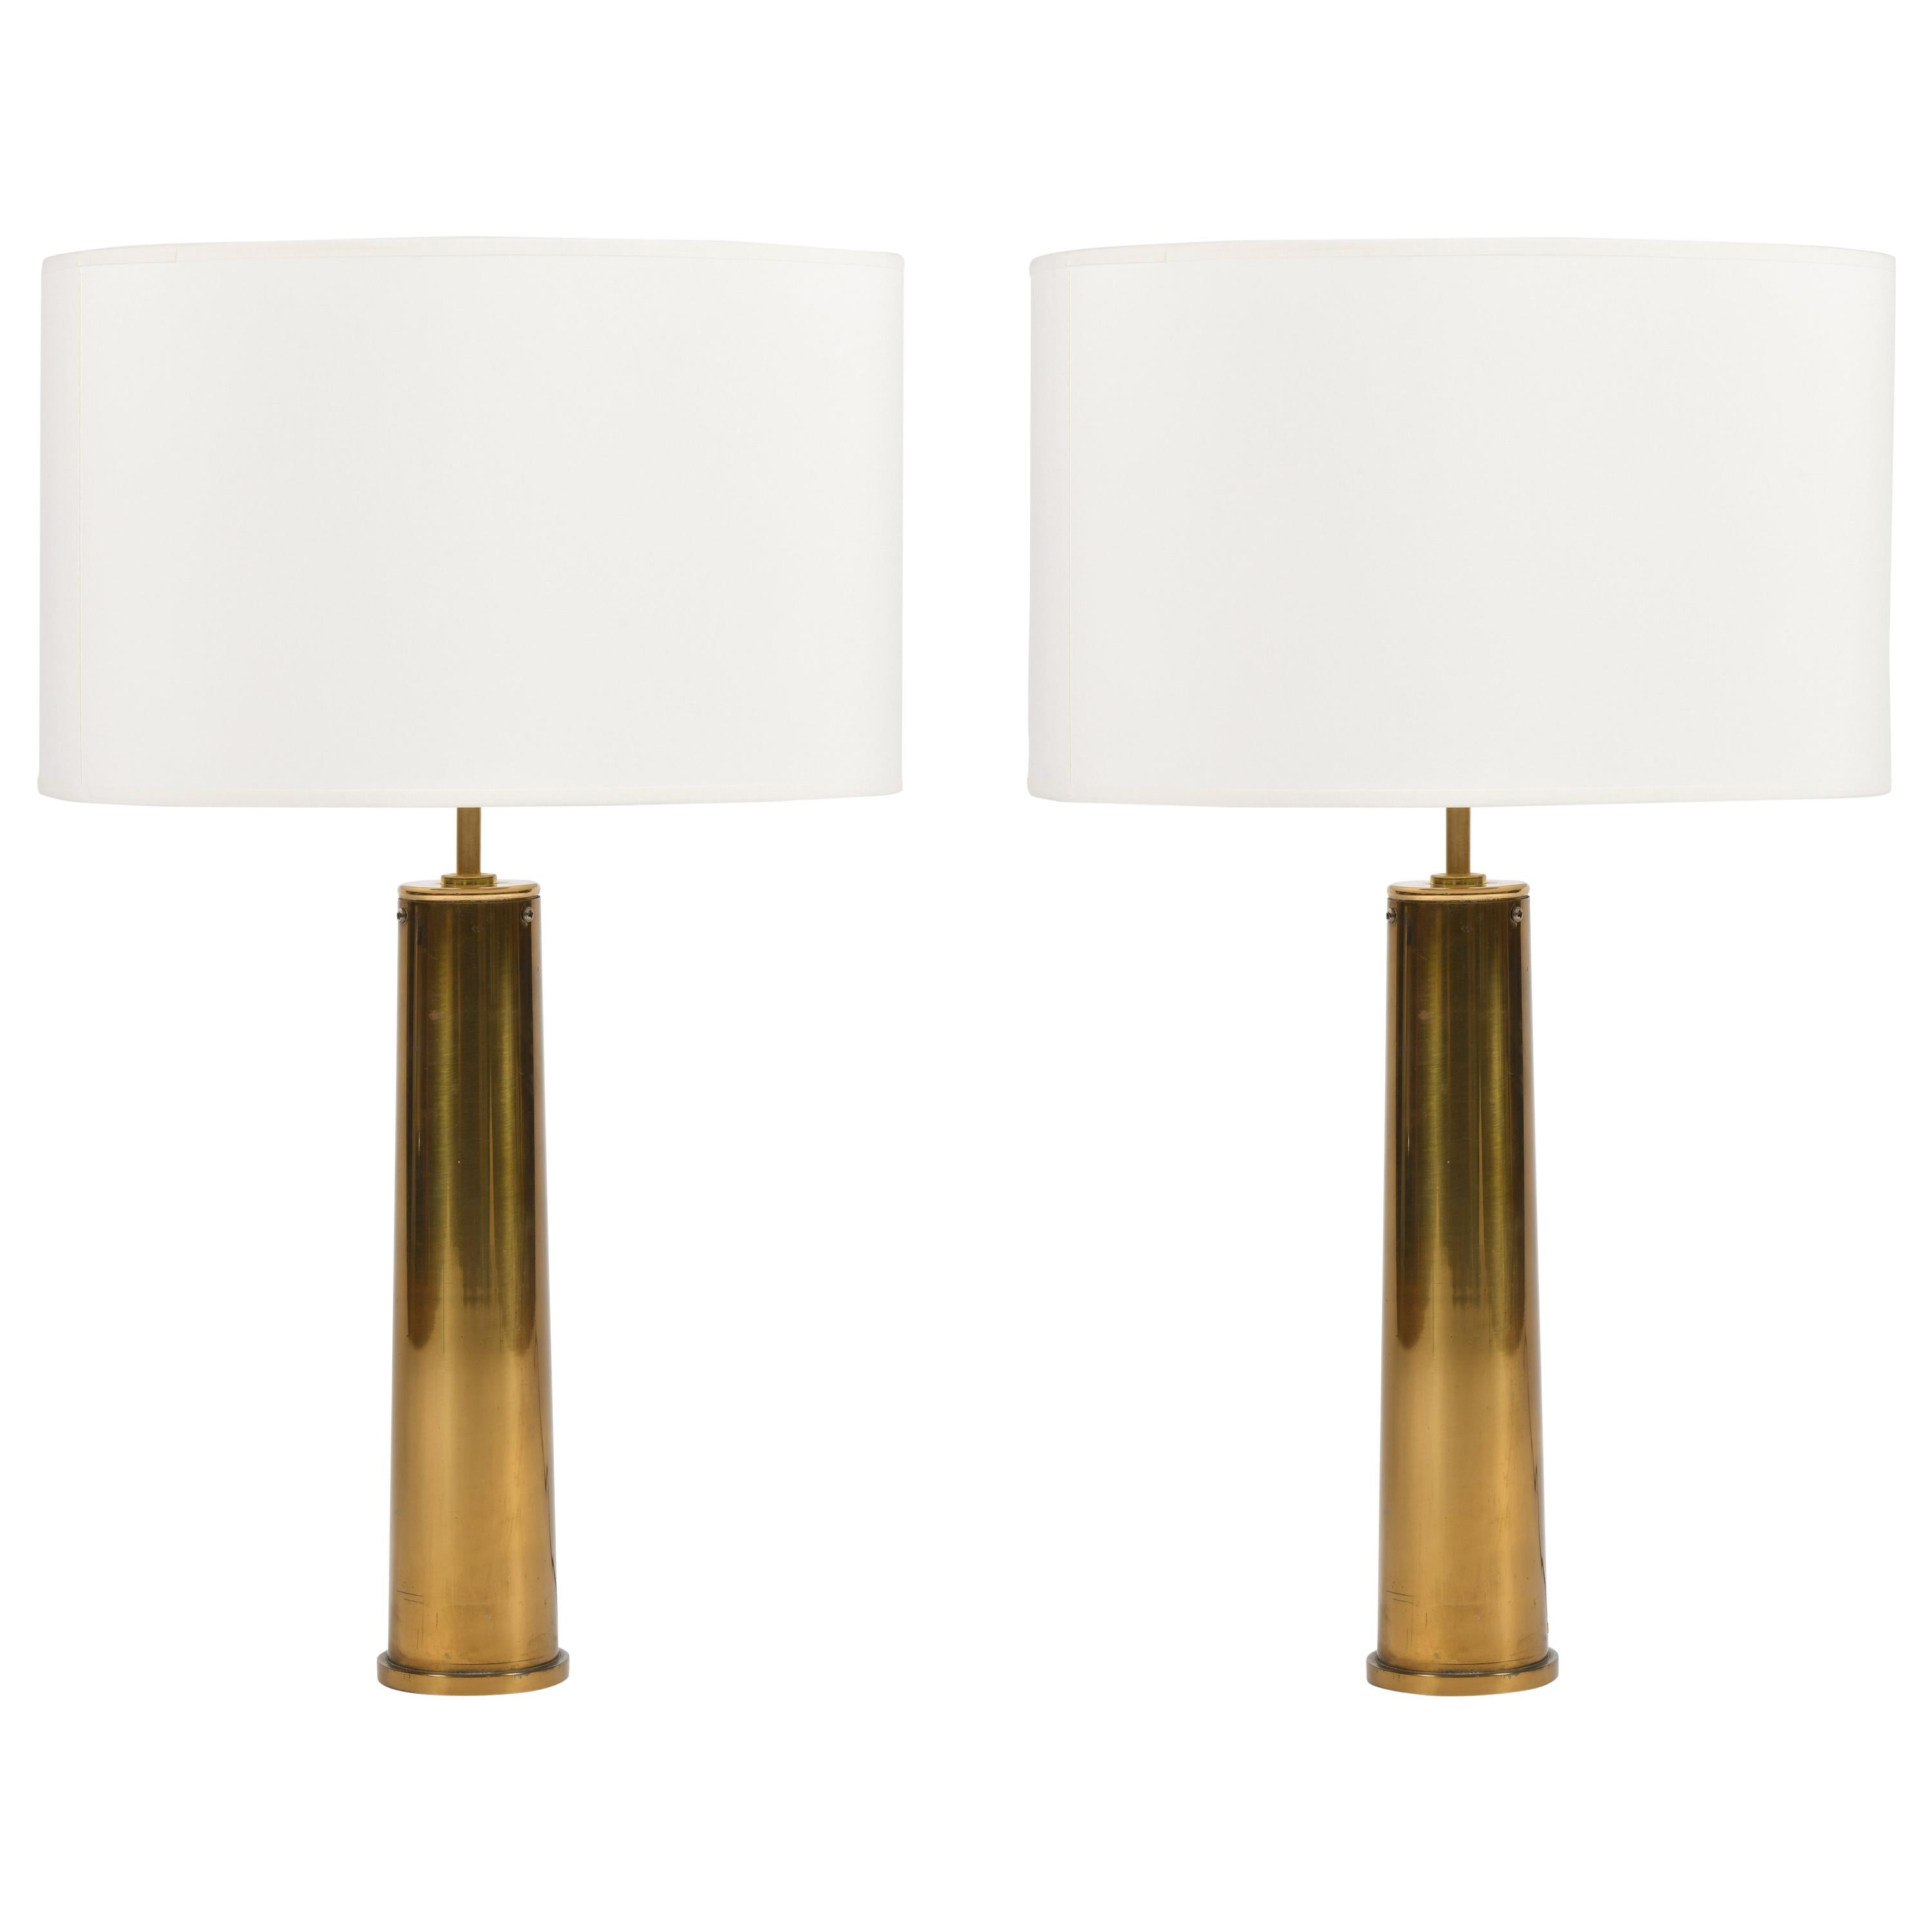 Pair of Mid-Century Modern Swedish Brass Table Lamps